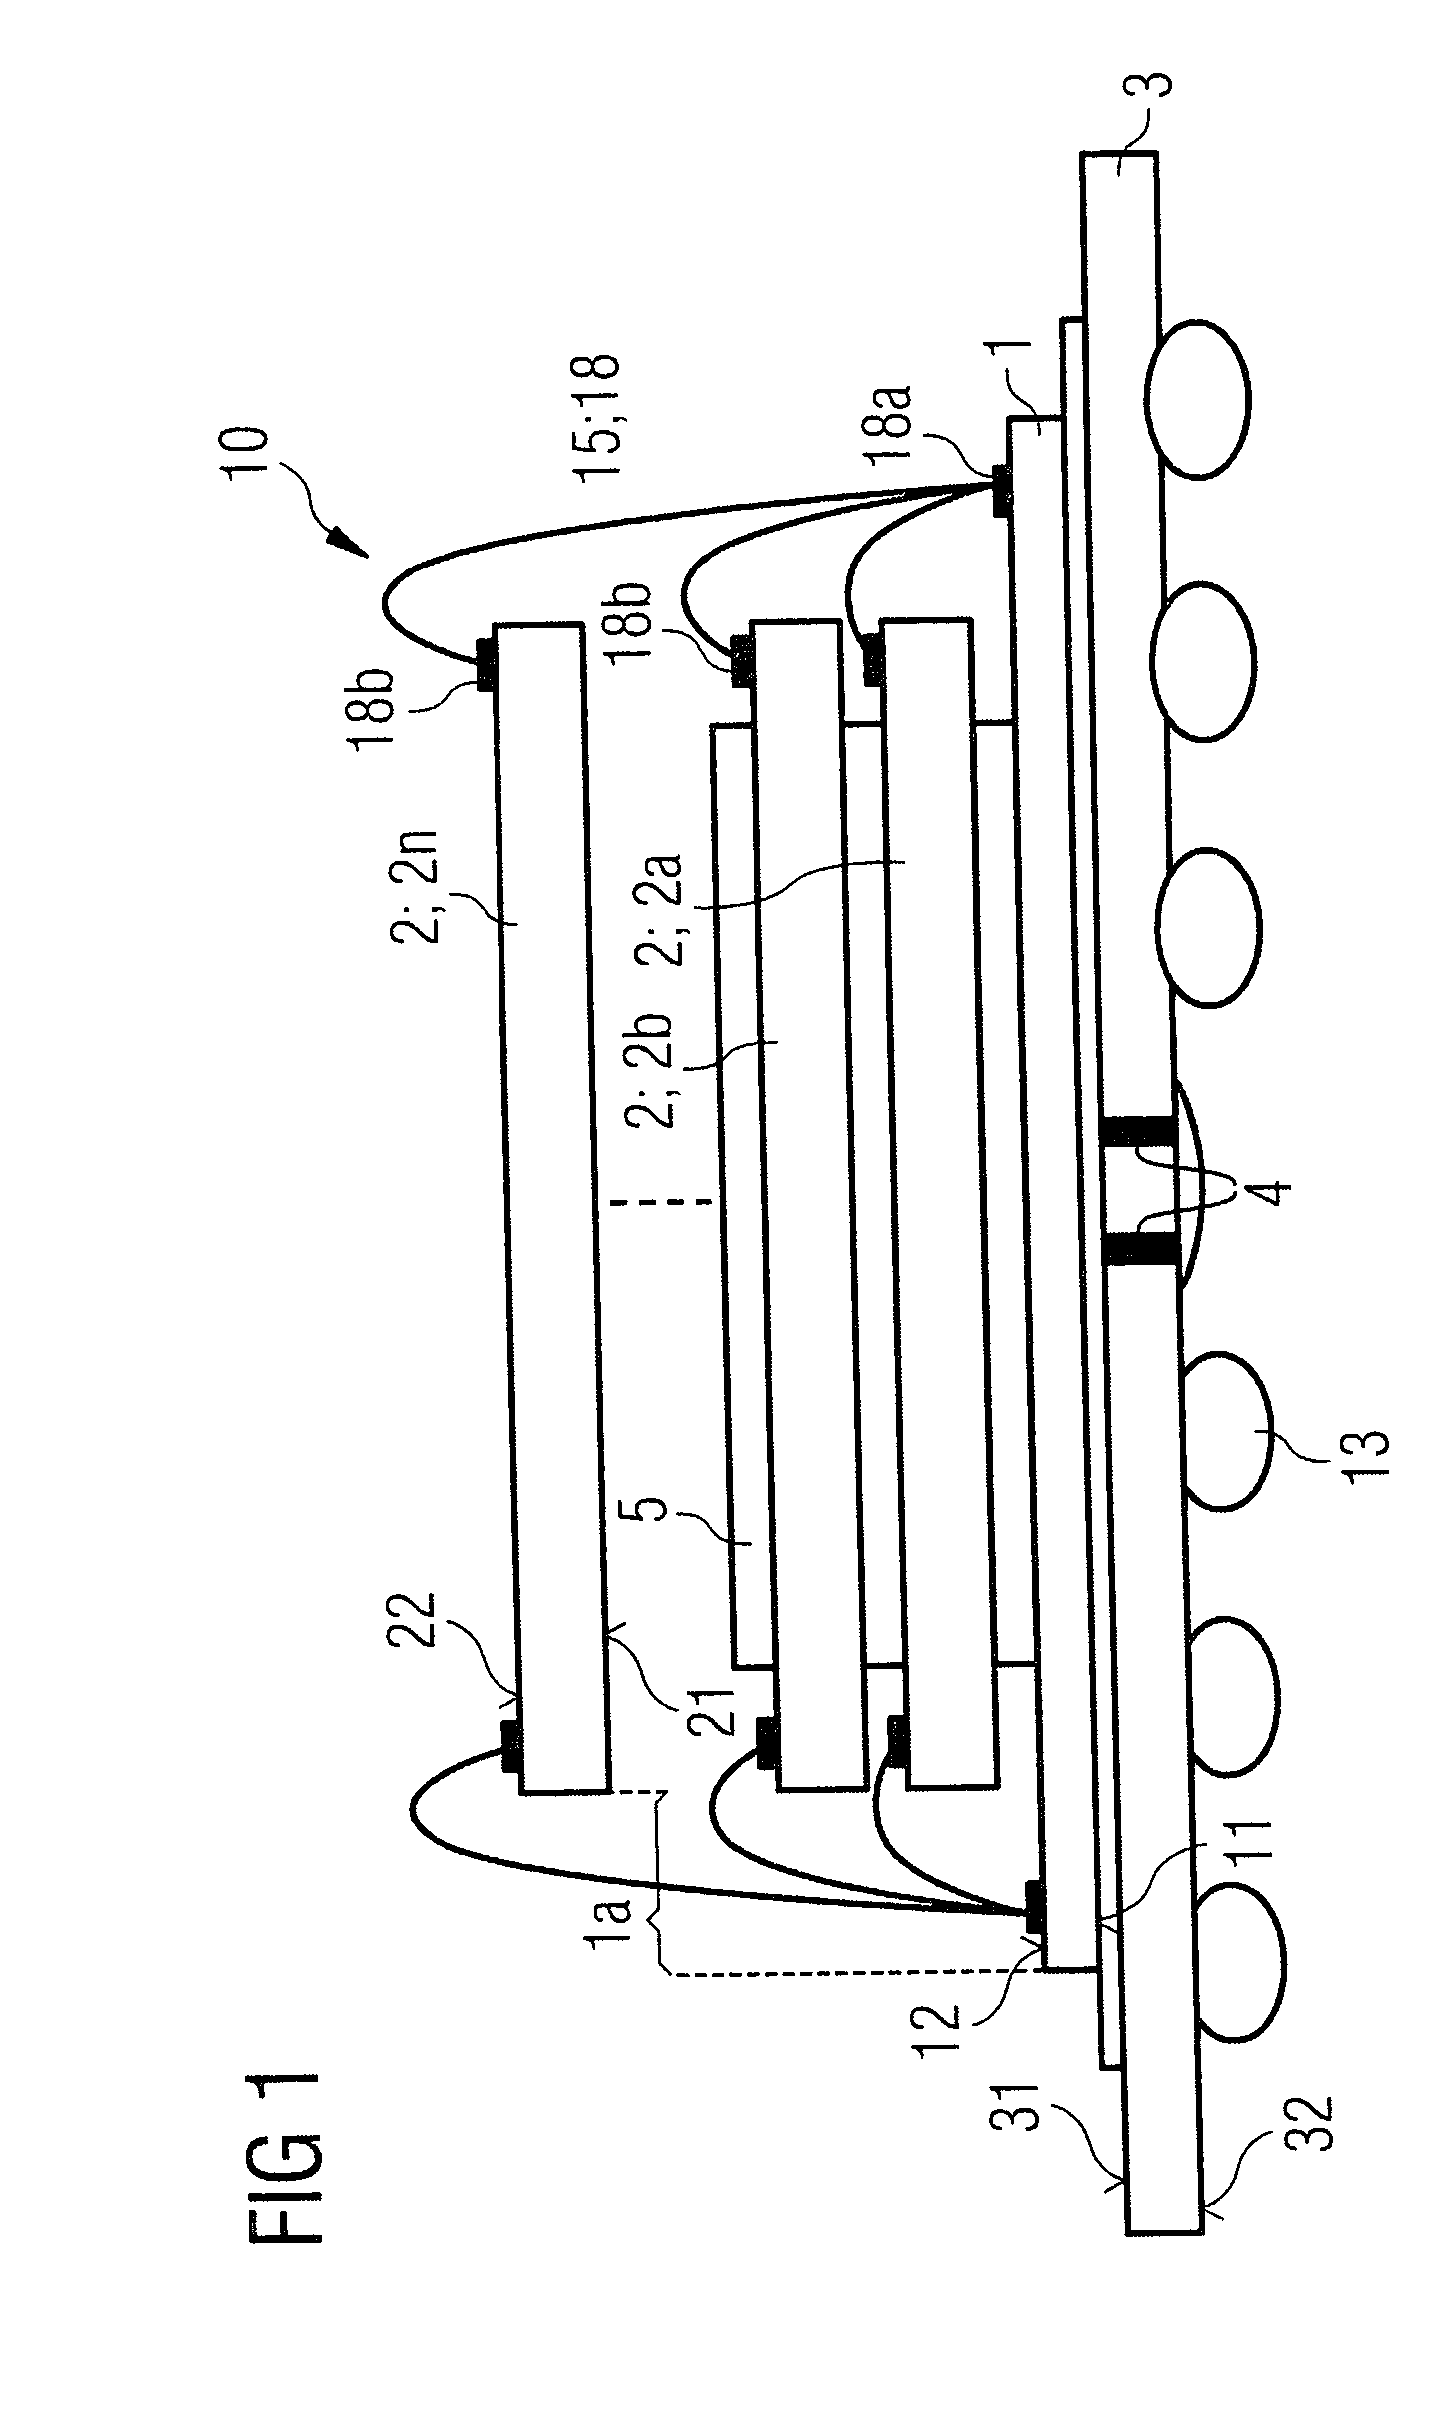 Semiconductor product and method for forming a semiconductor product